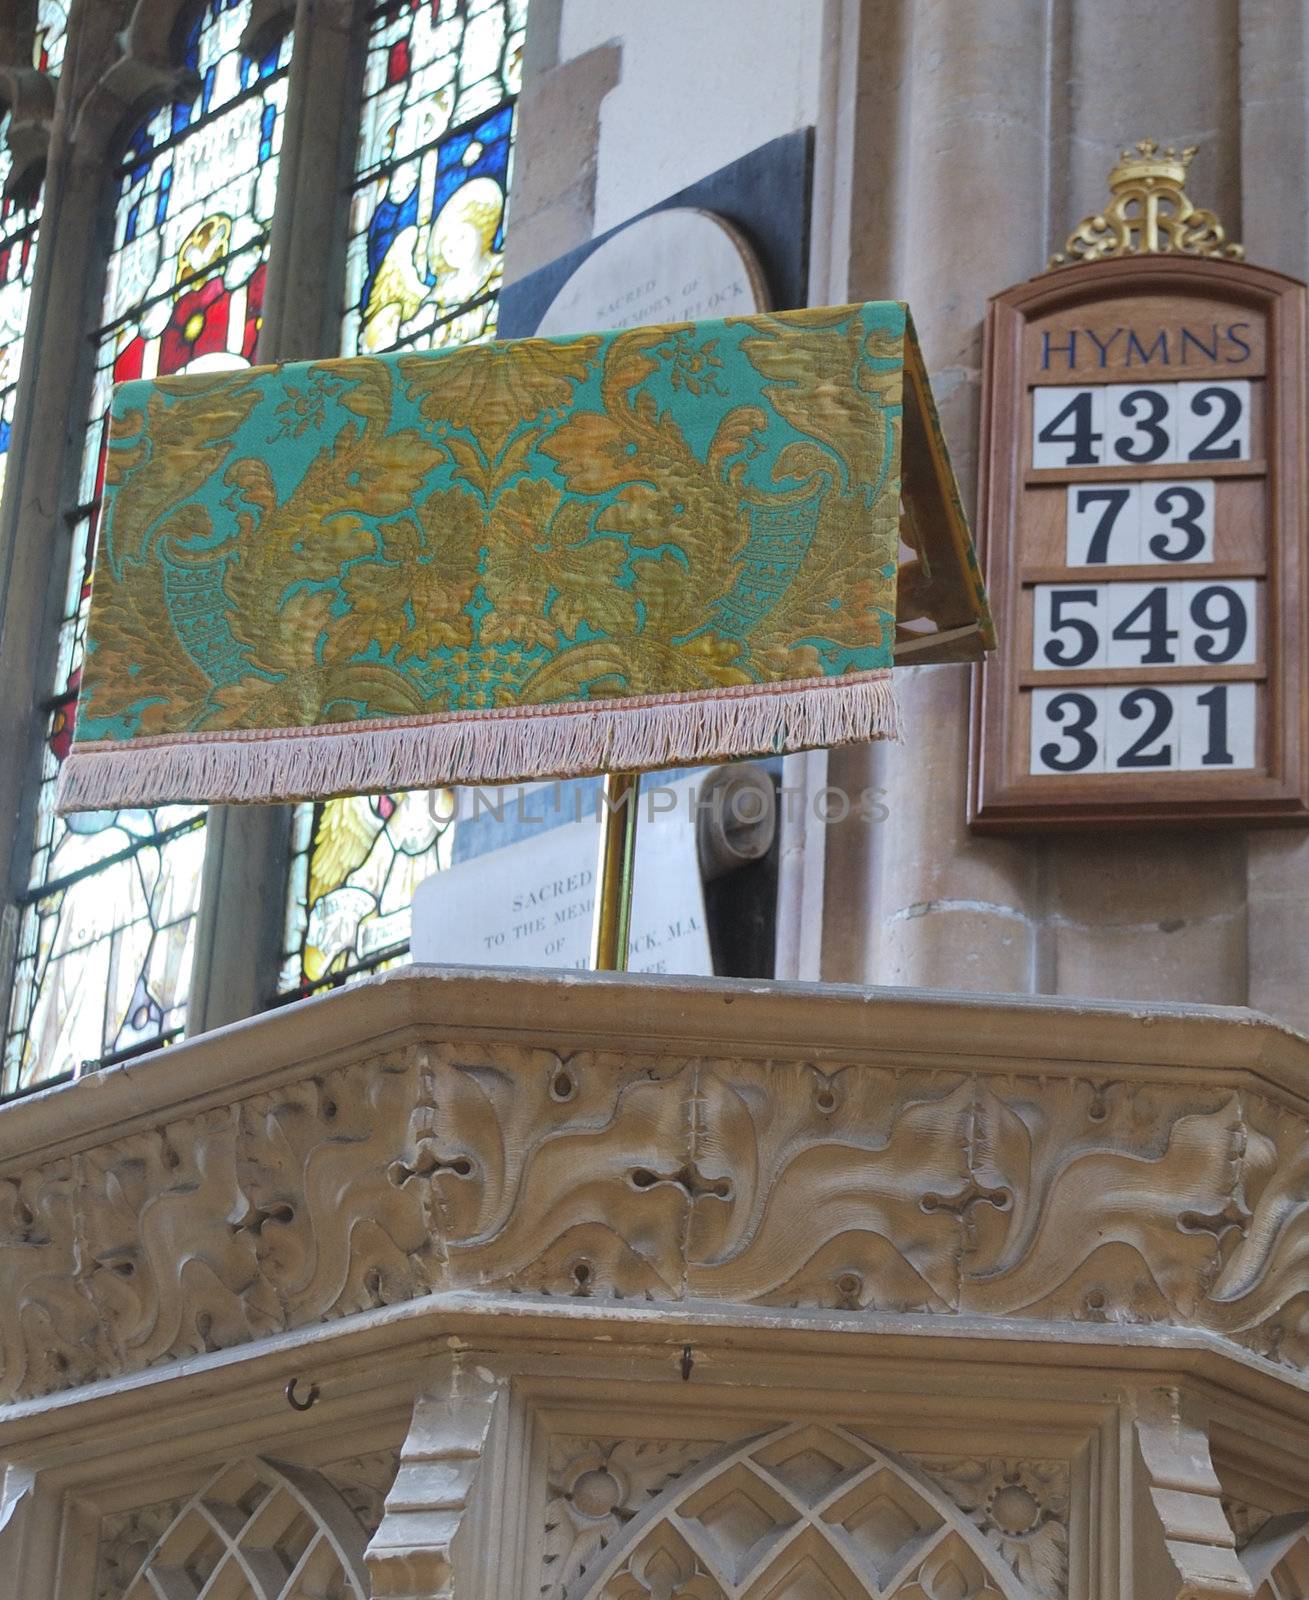 Pulpit and hym Numbers